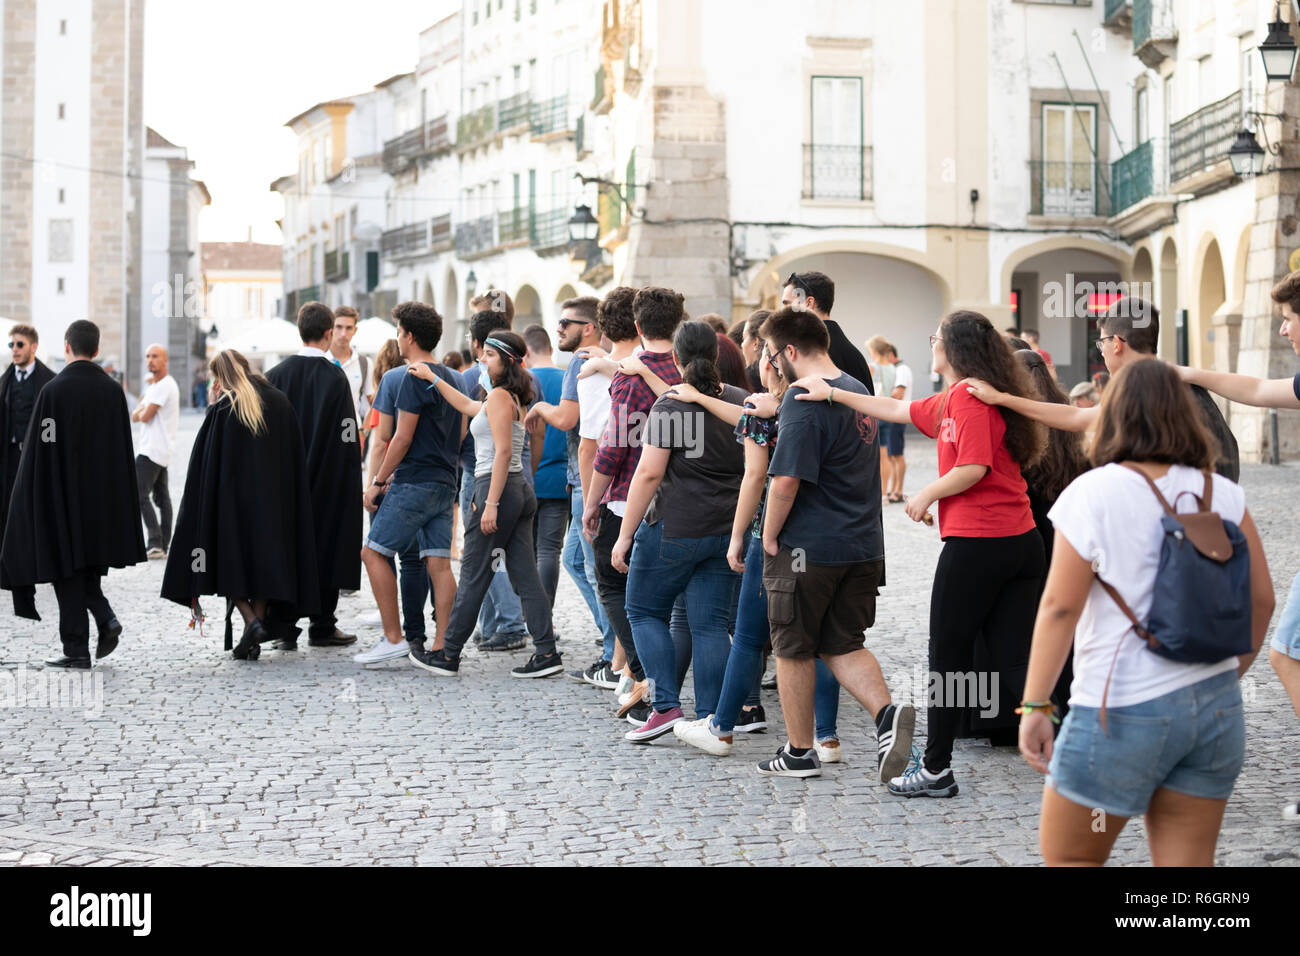 New students with hands on each others shoulders walking through the old town in an induction ceremony, Evora, Alentejo, Portugal, Europe Stock Photo